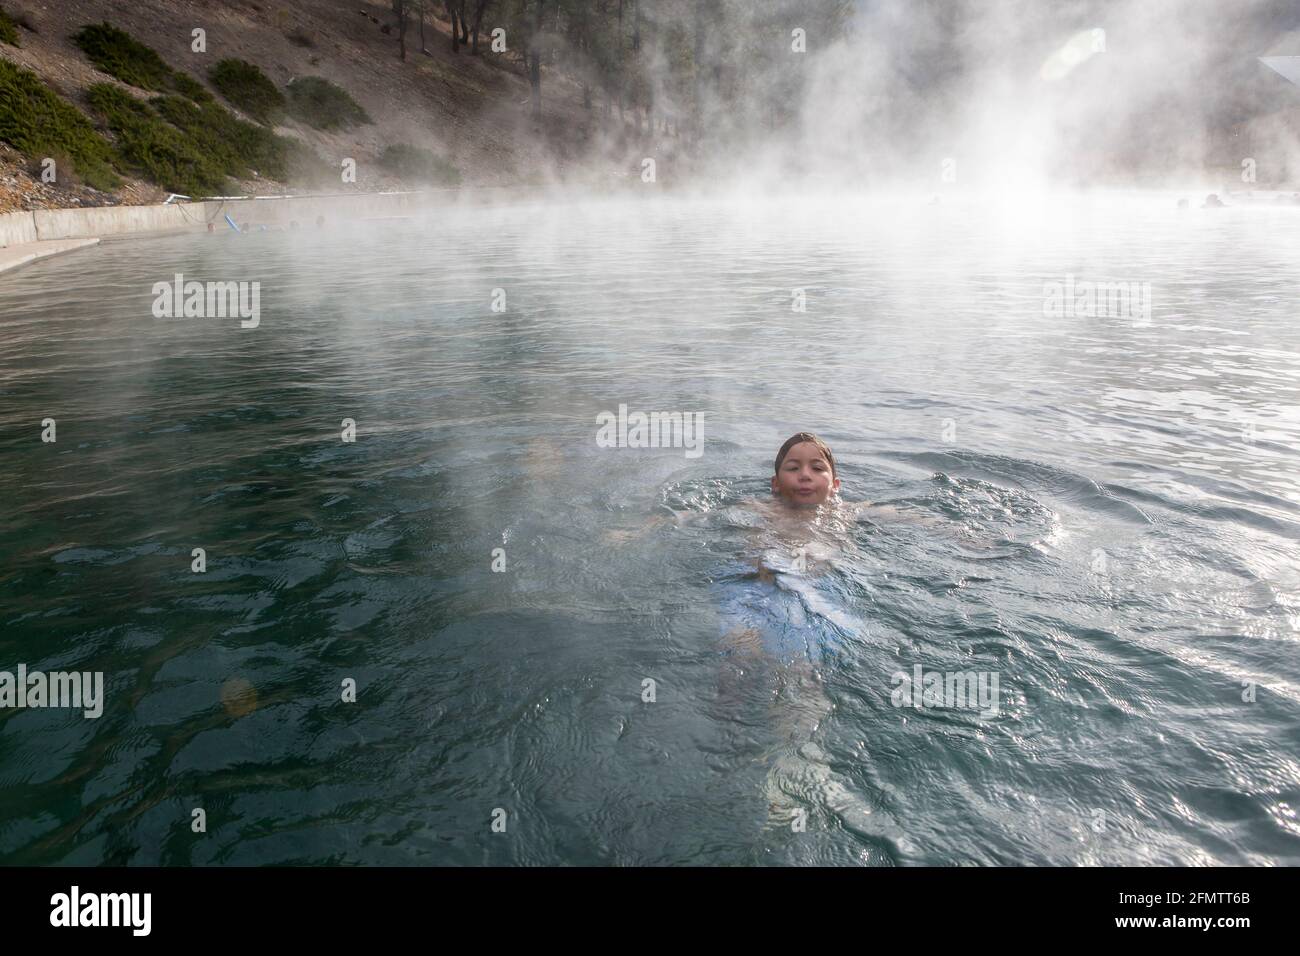 A boy floats in a Trinity Hot Springs pool with steam rising Stock Photo